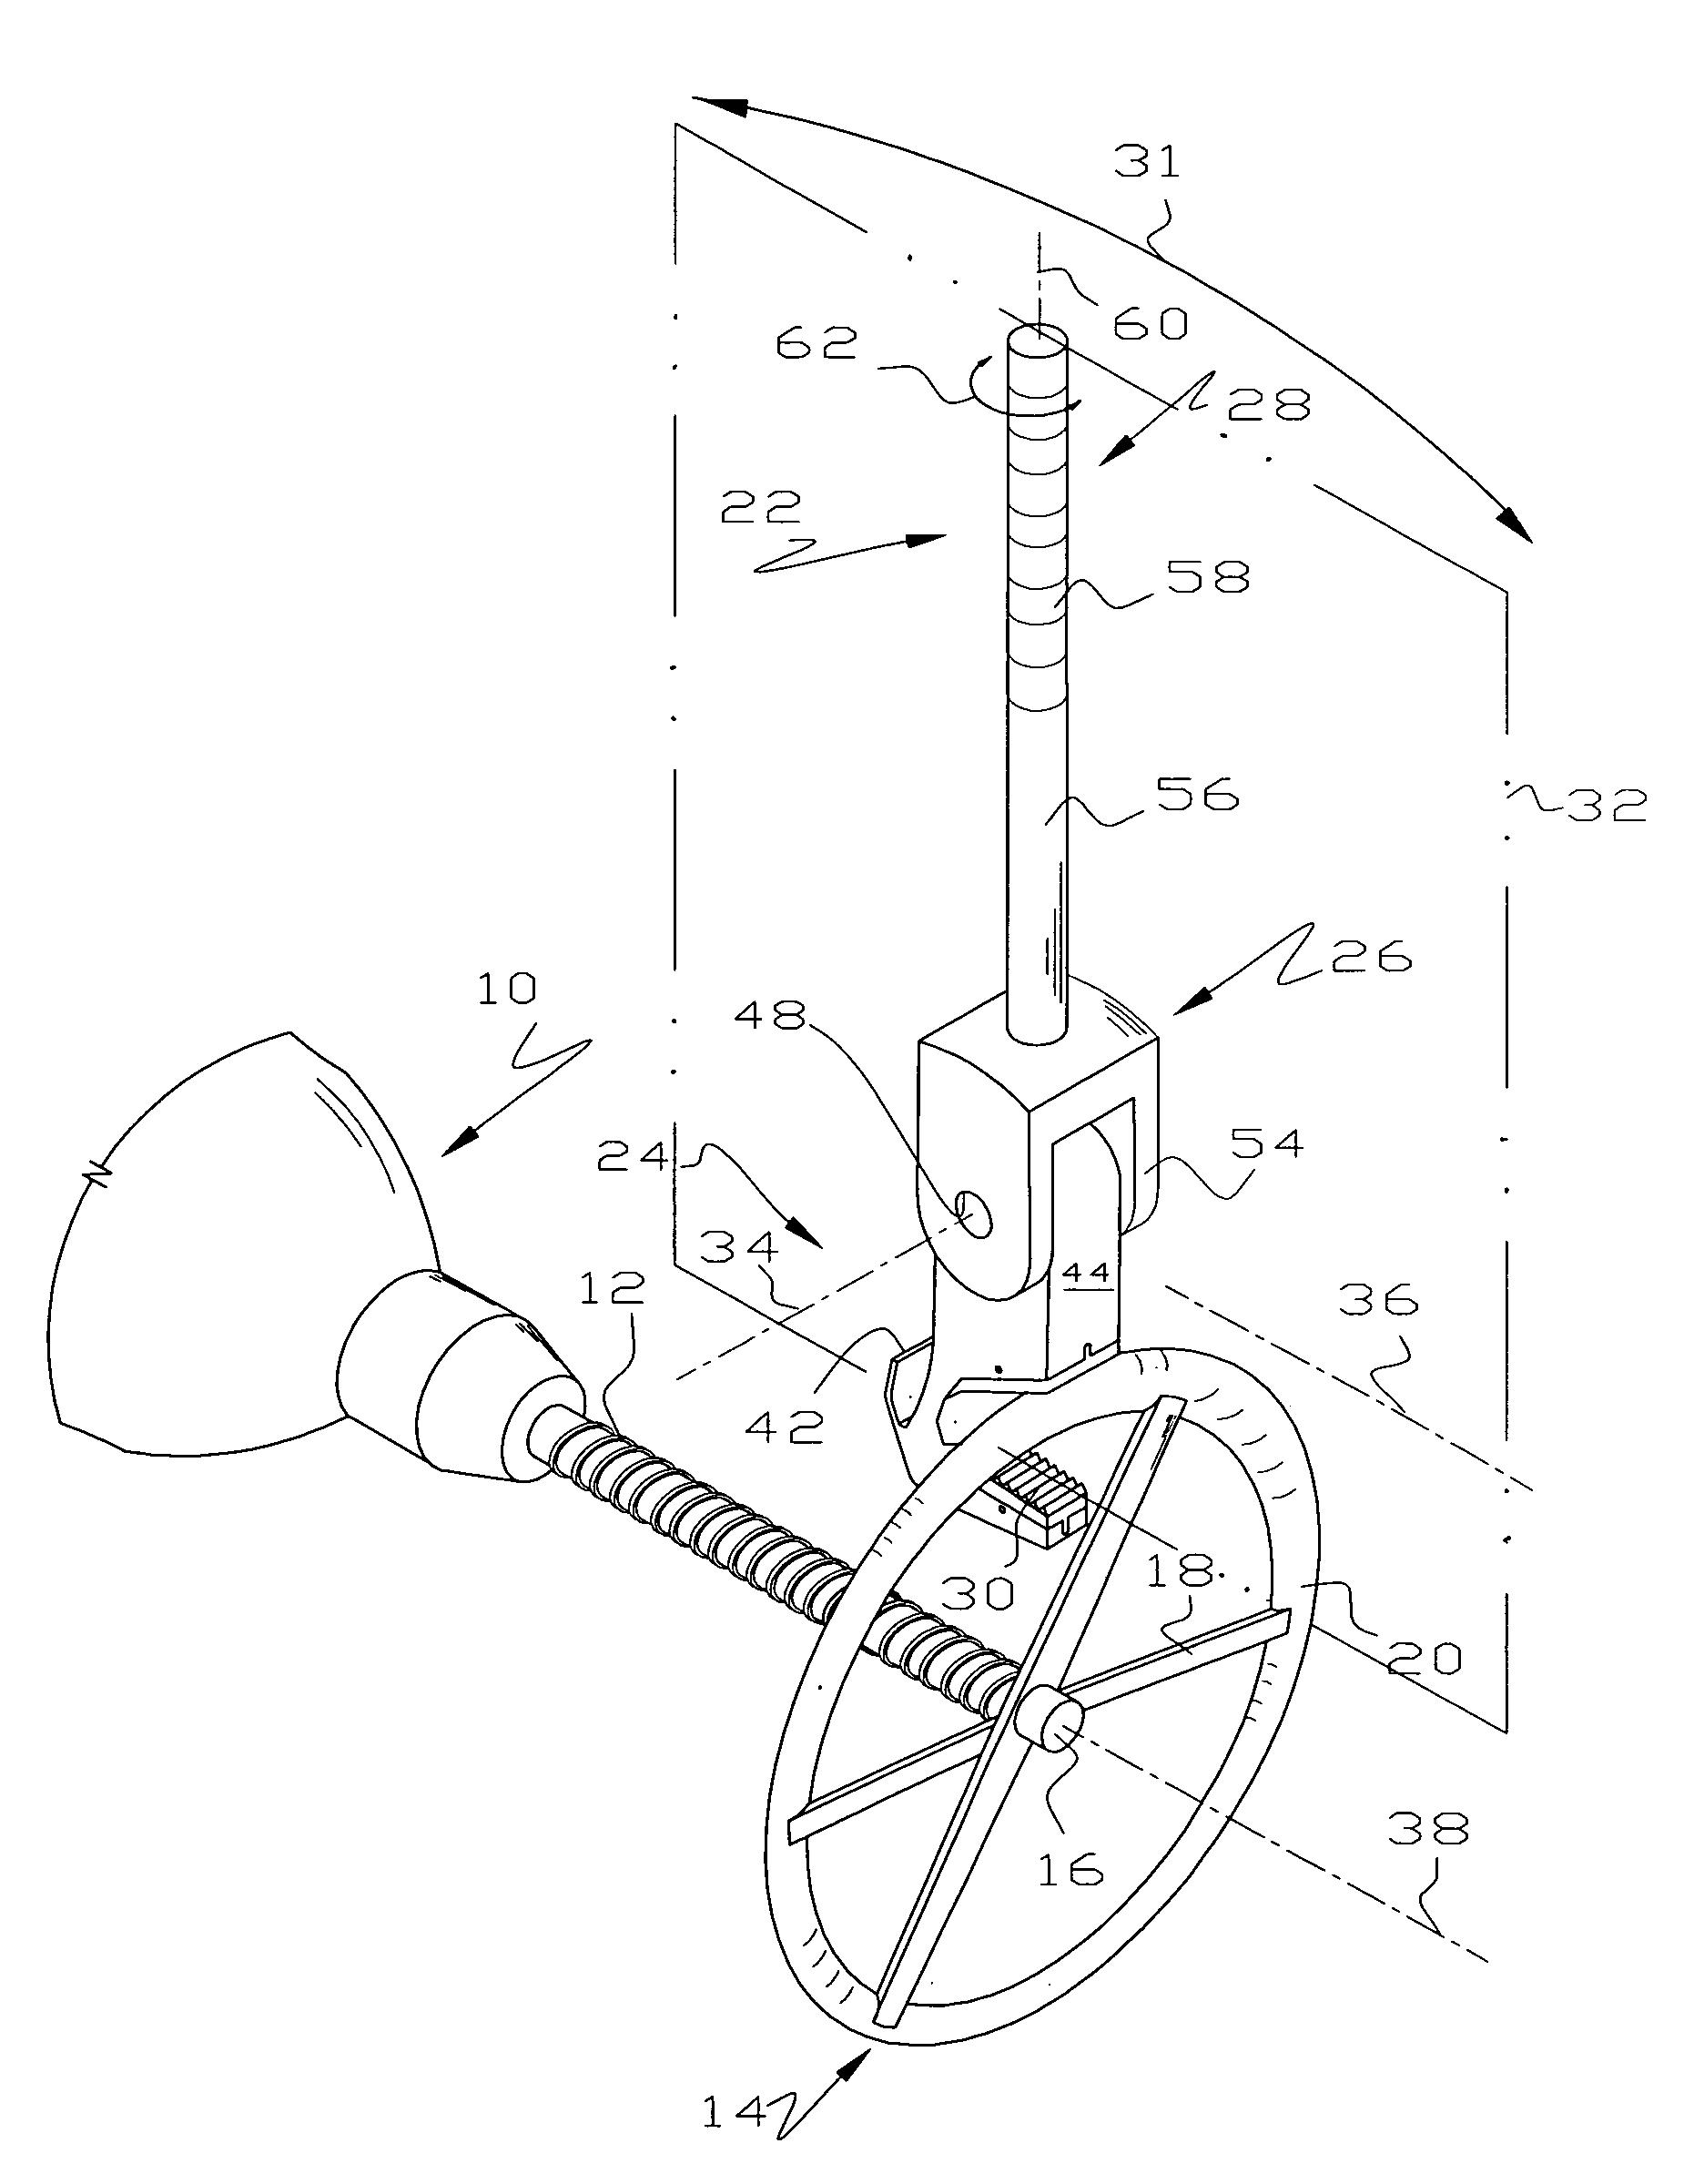 Method of using adjustable pivotal wrench